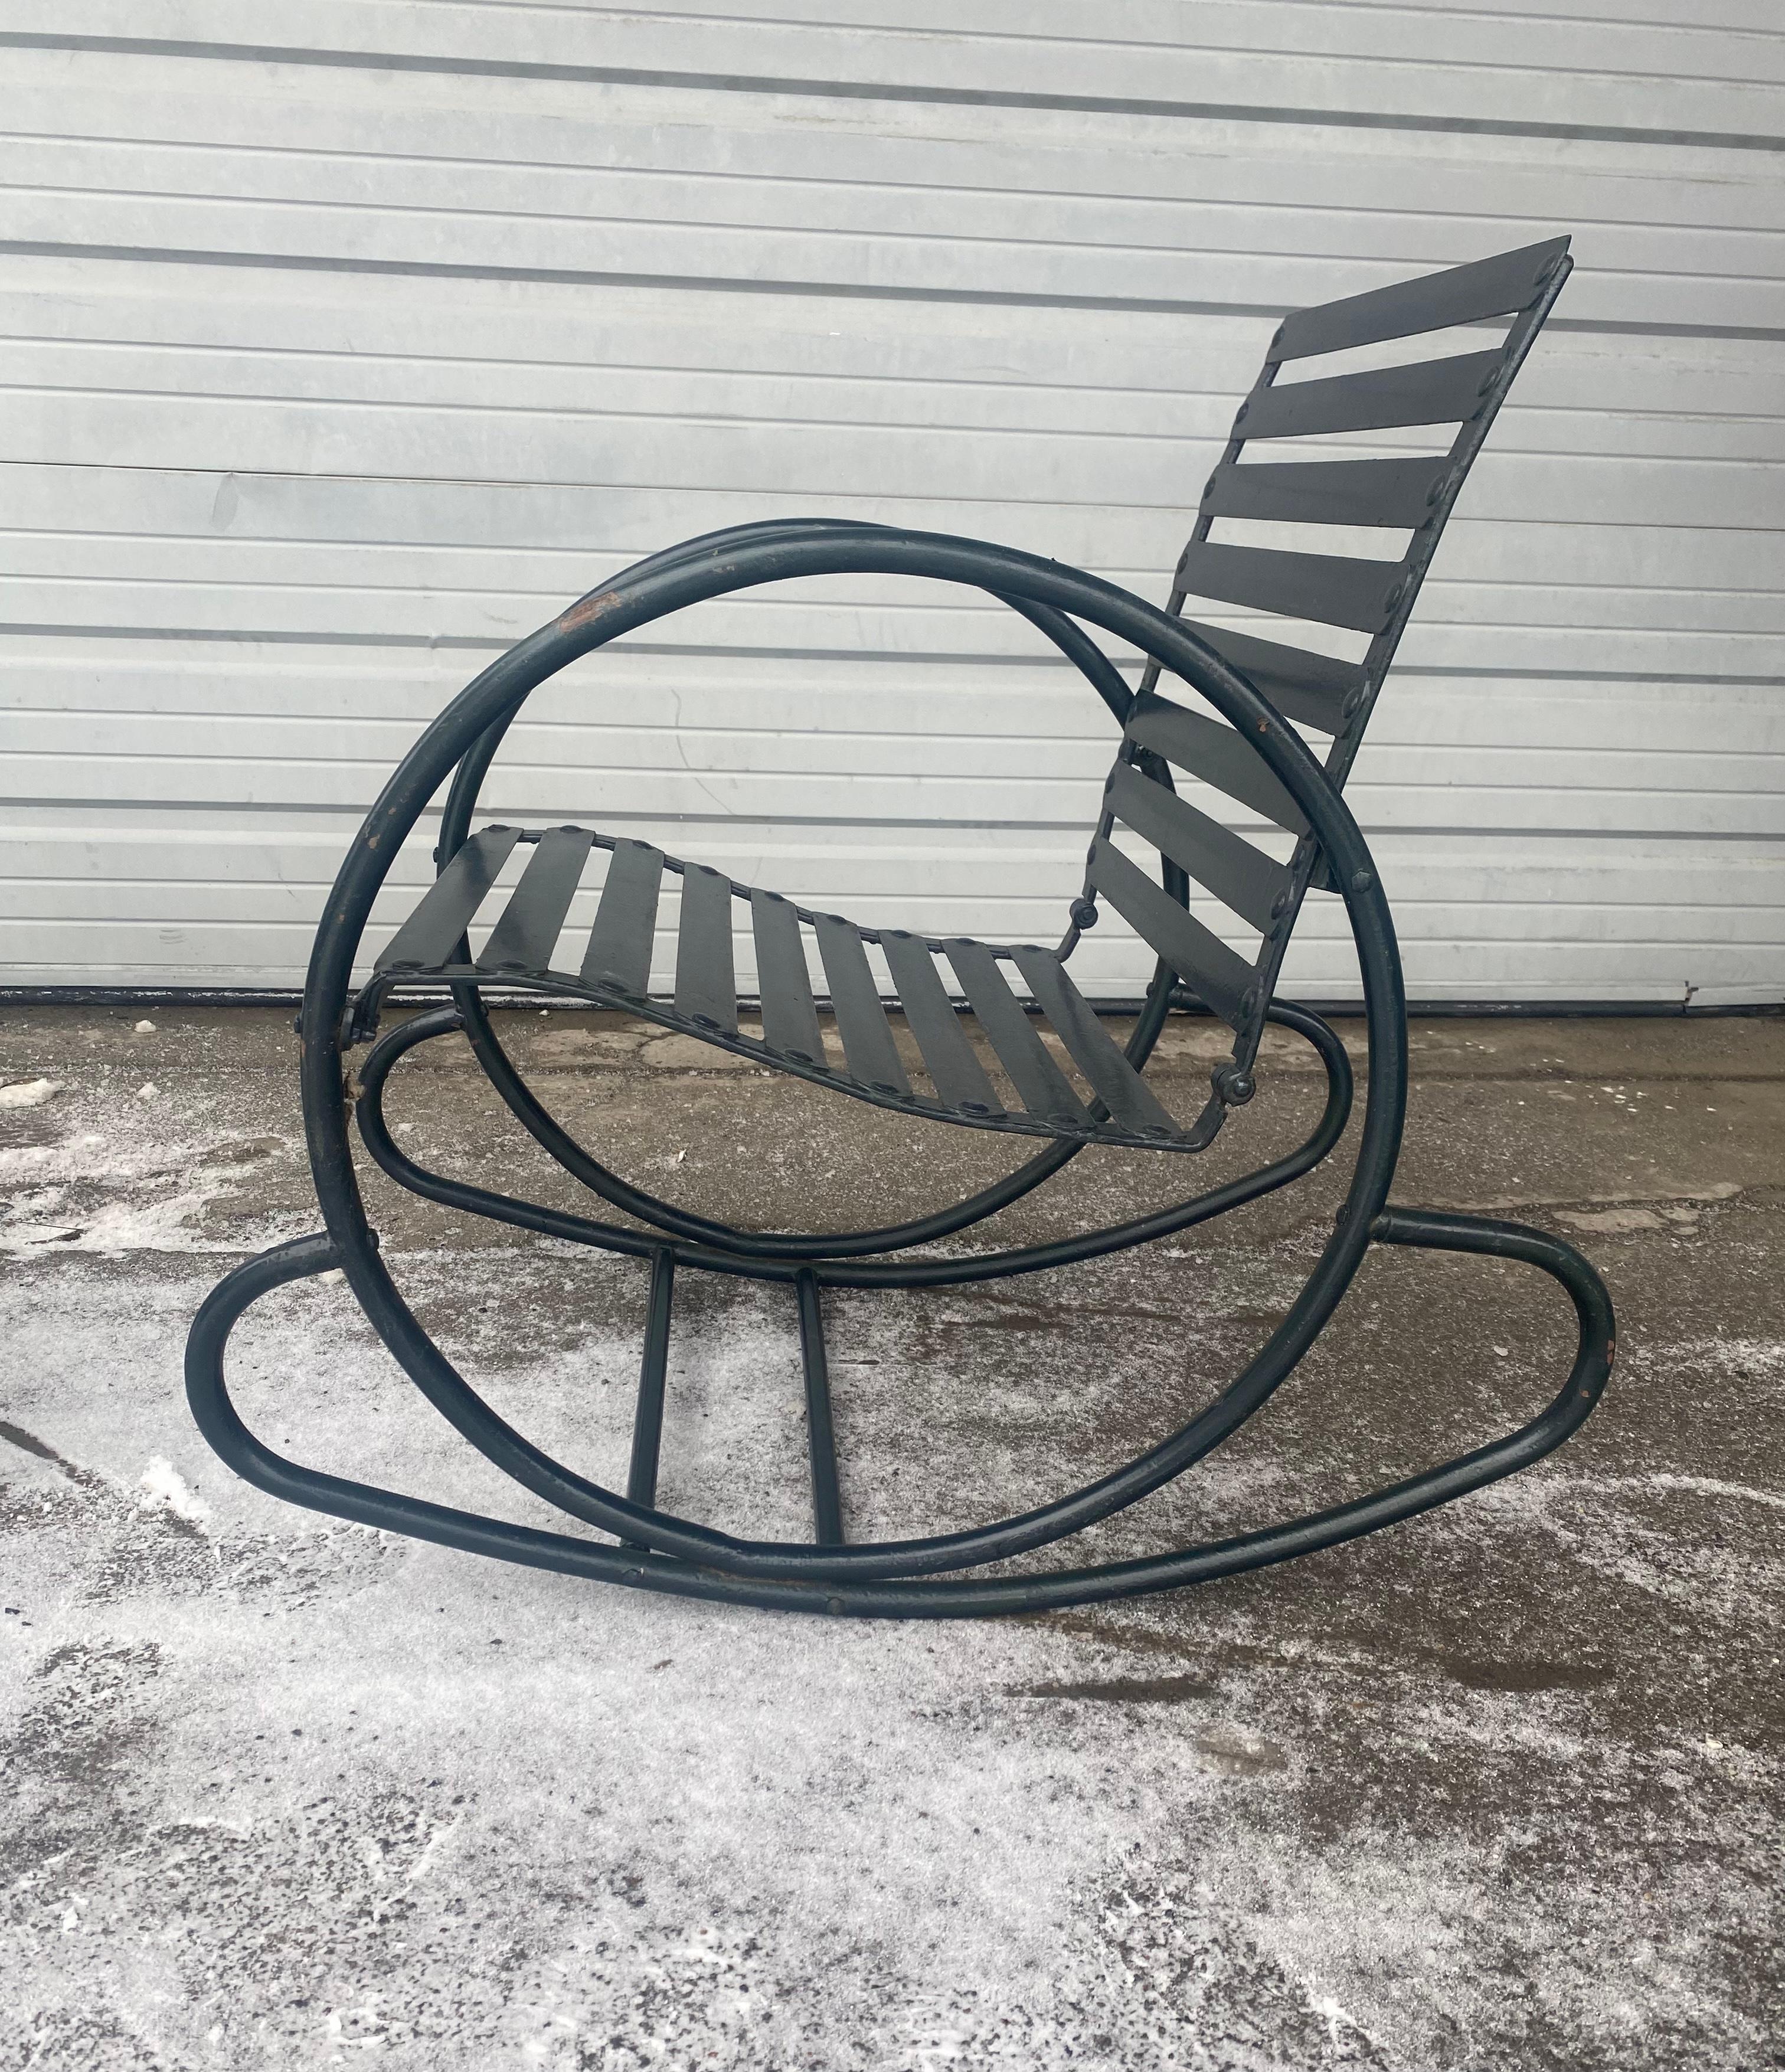 Pair 1930s American Art Deco / Streamline  'hoop' Steel Rocking Chairs,,Superior quality and construction.. Amazing design.. Extremely comfortable, Hand delivery avail to New York City or anywhere en route from Buffalo Ny

